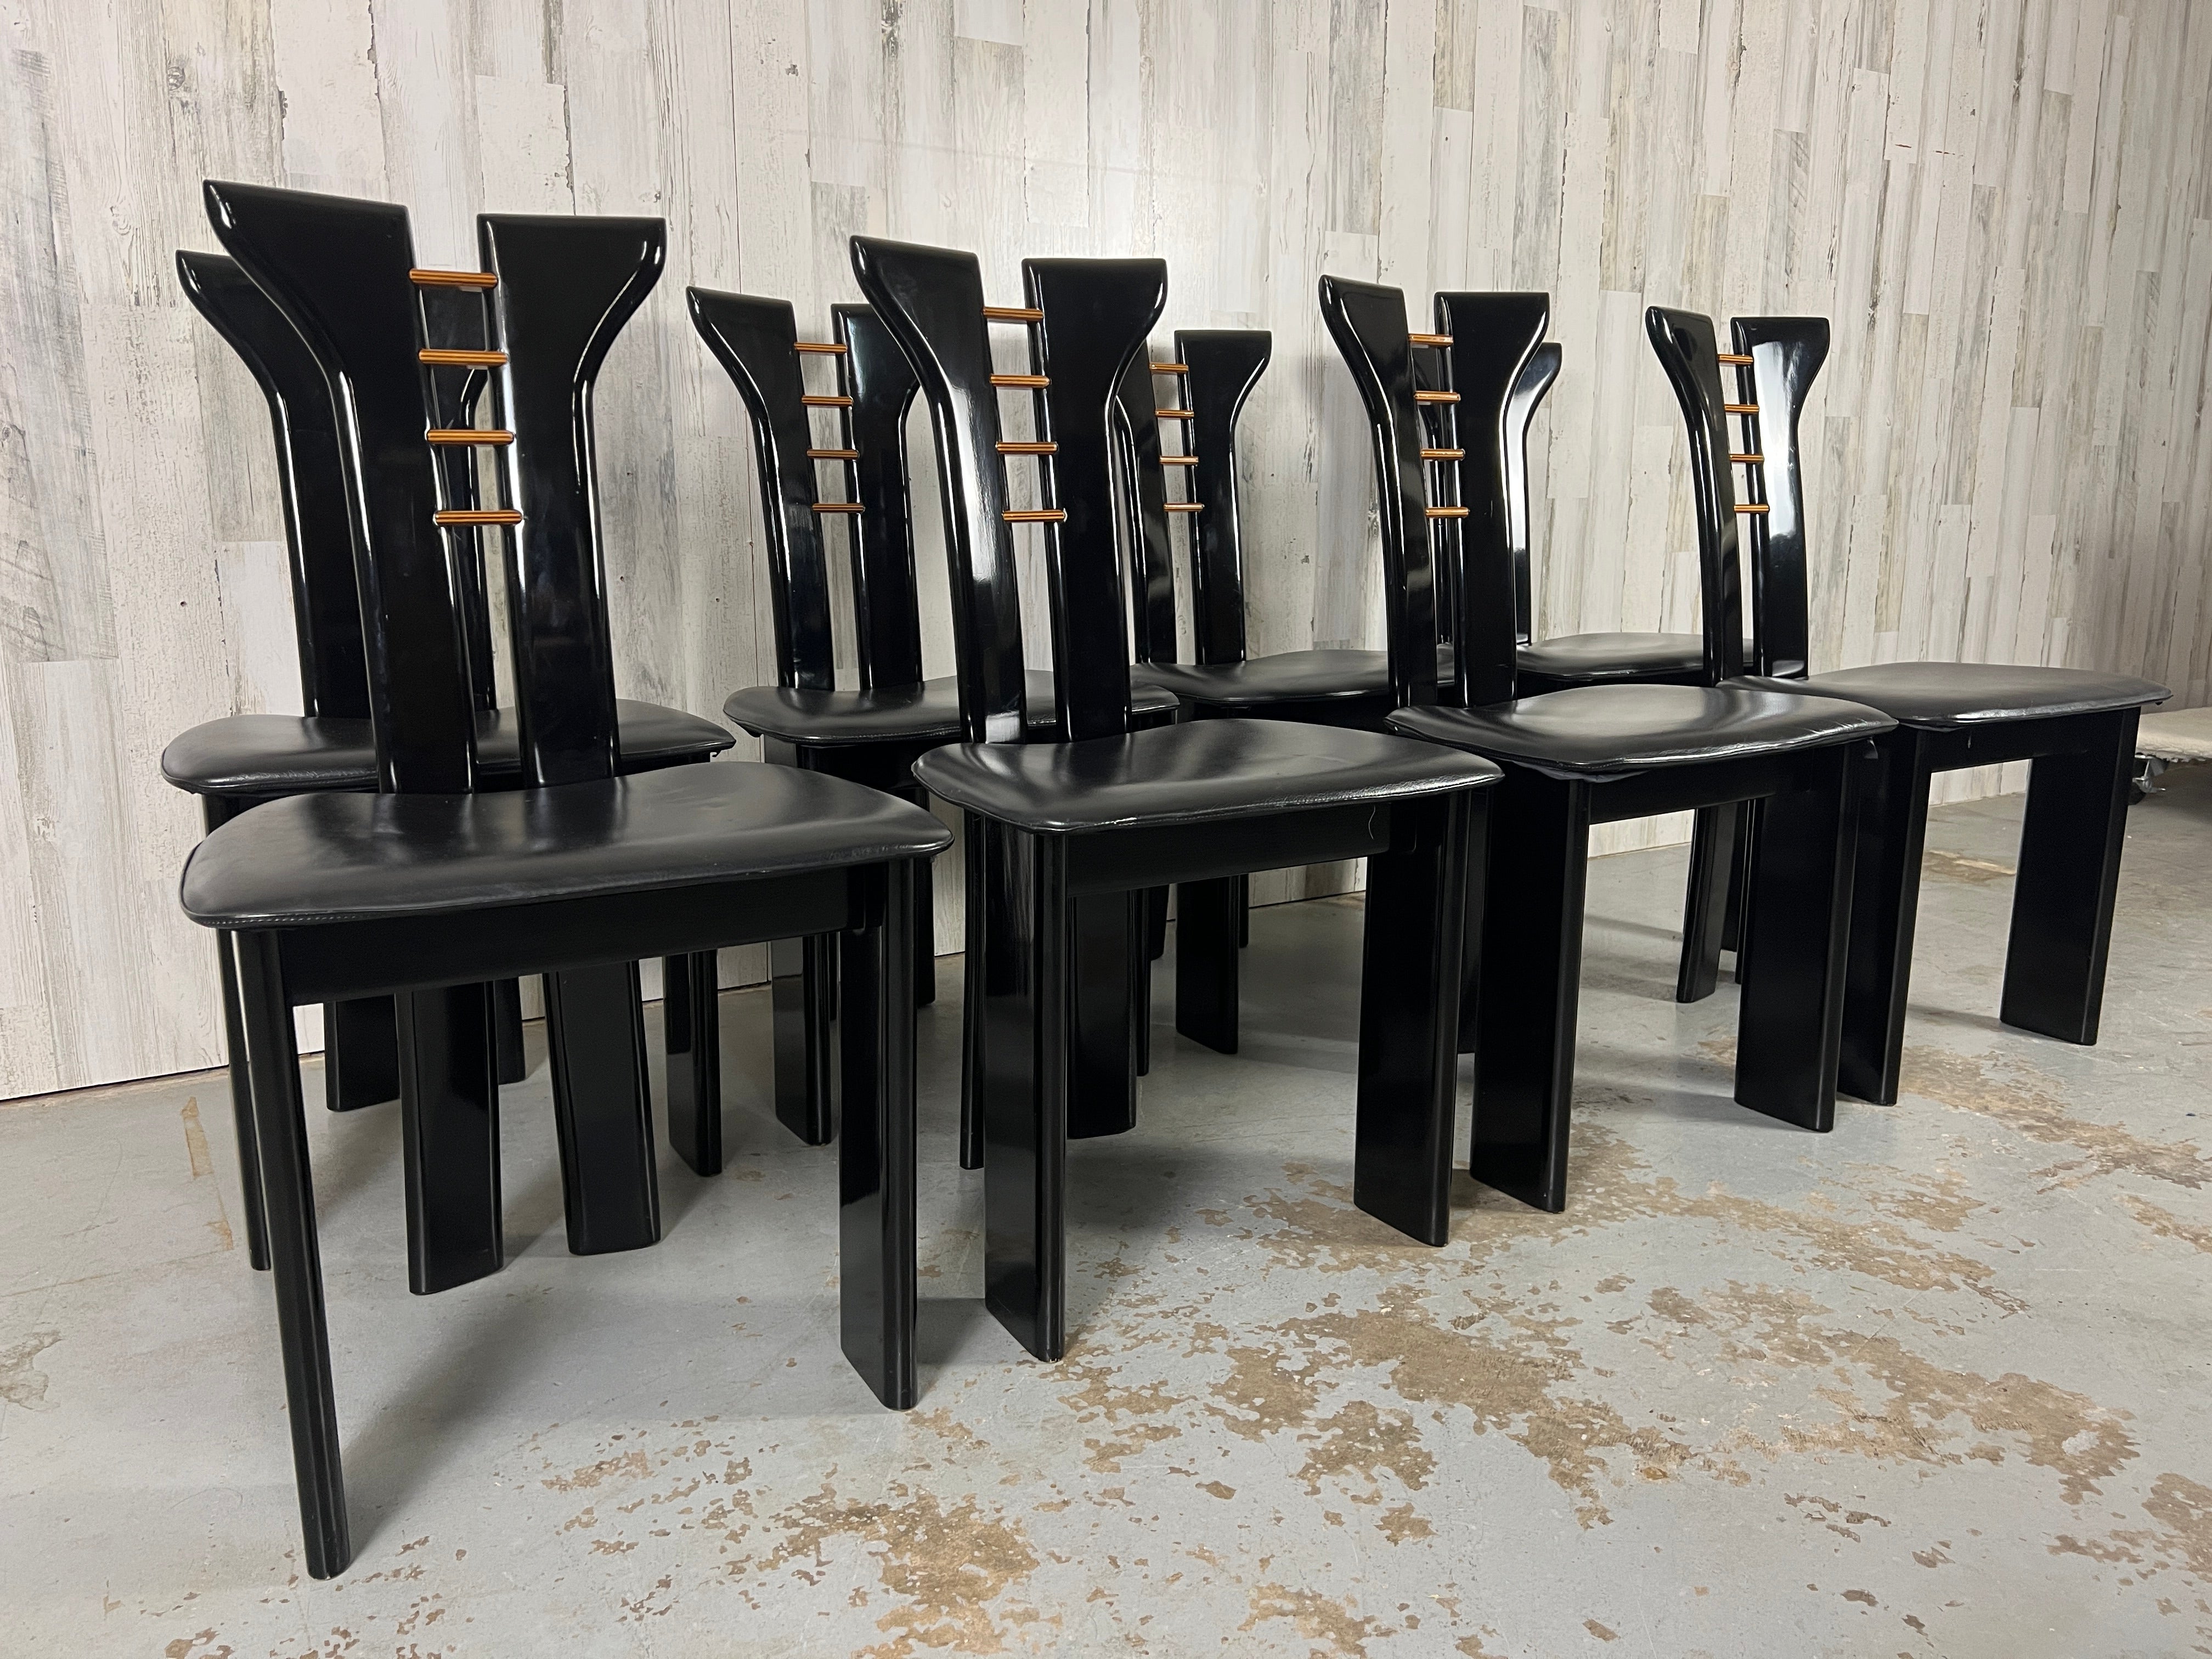 Pierre Cardin For Roche Bobois Italian Black Lacquer dining chairs- Set of 8. Black lacquer finish with wood accents. Sculptural split back with a multi-layered wood detail. Supple European blackleather 